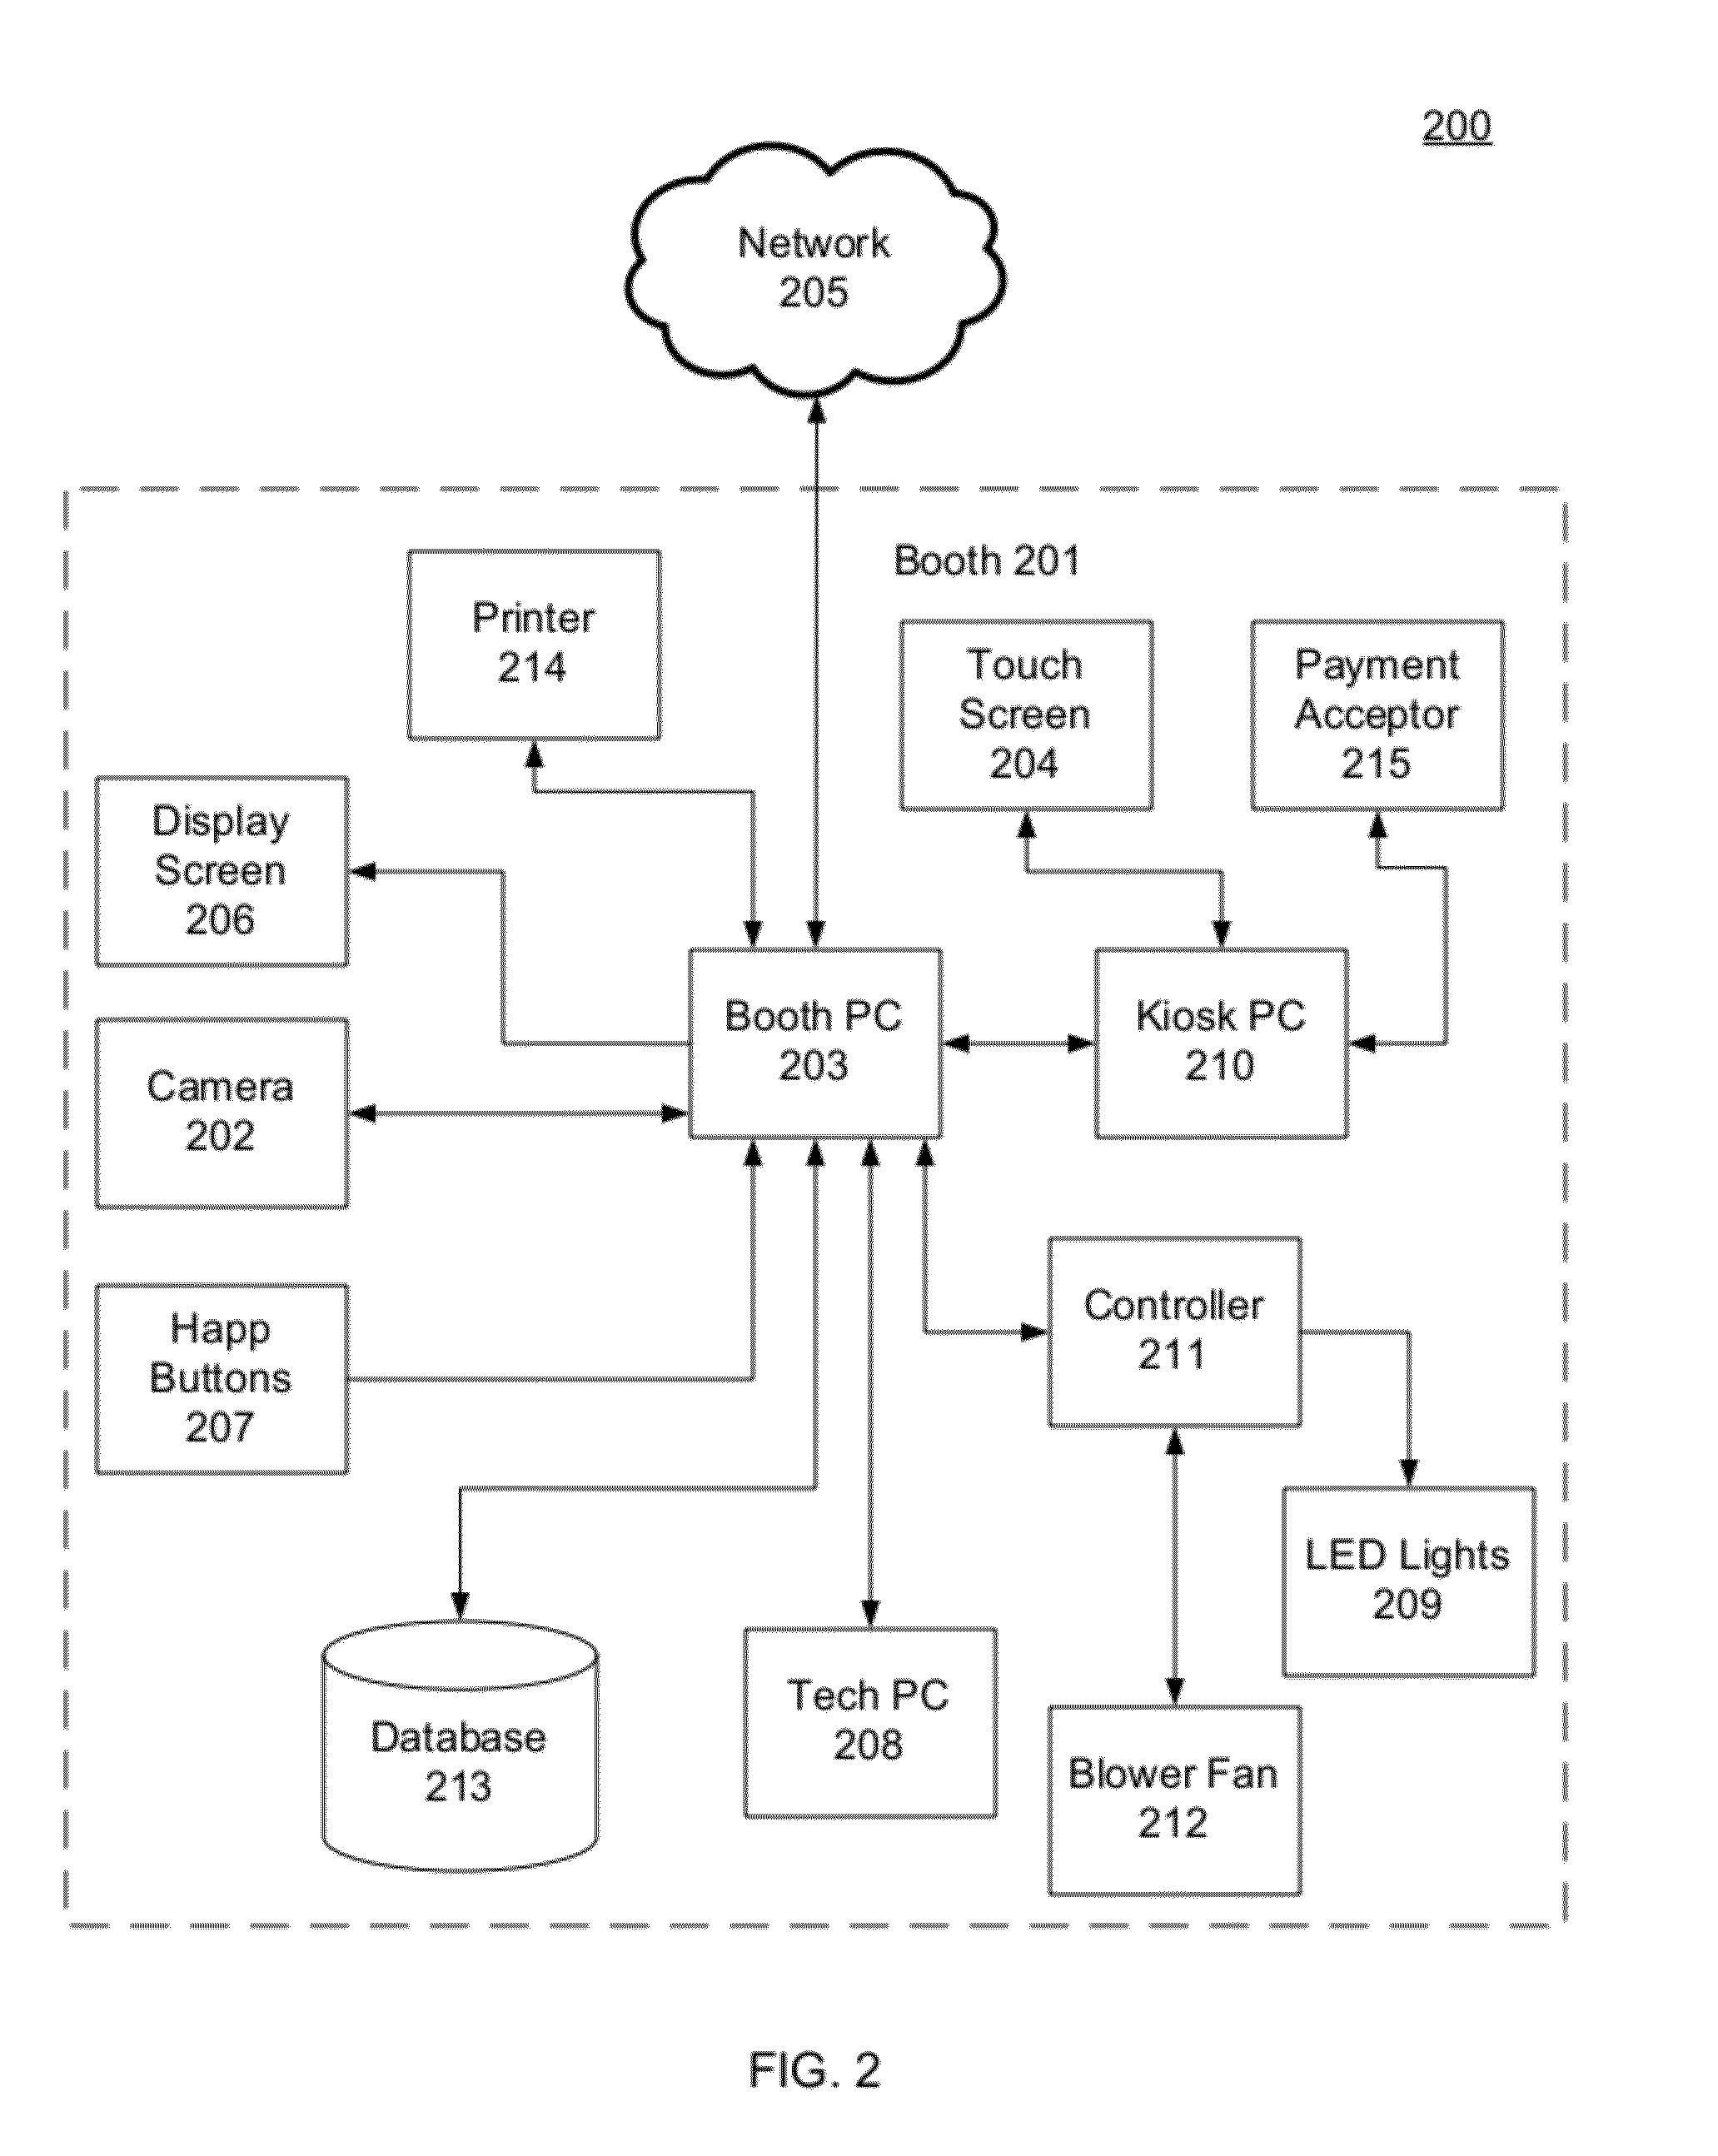 System and method for storing images captured from a booth